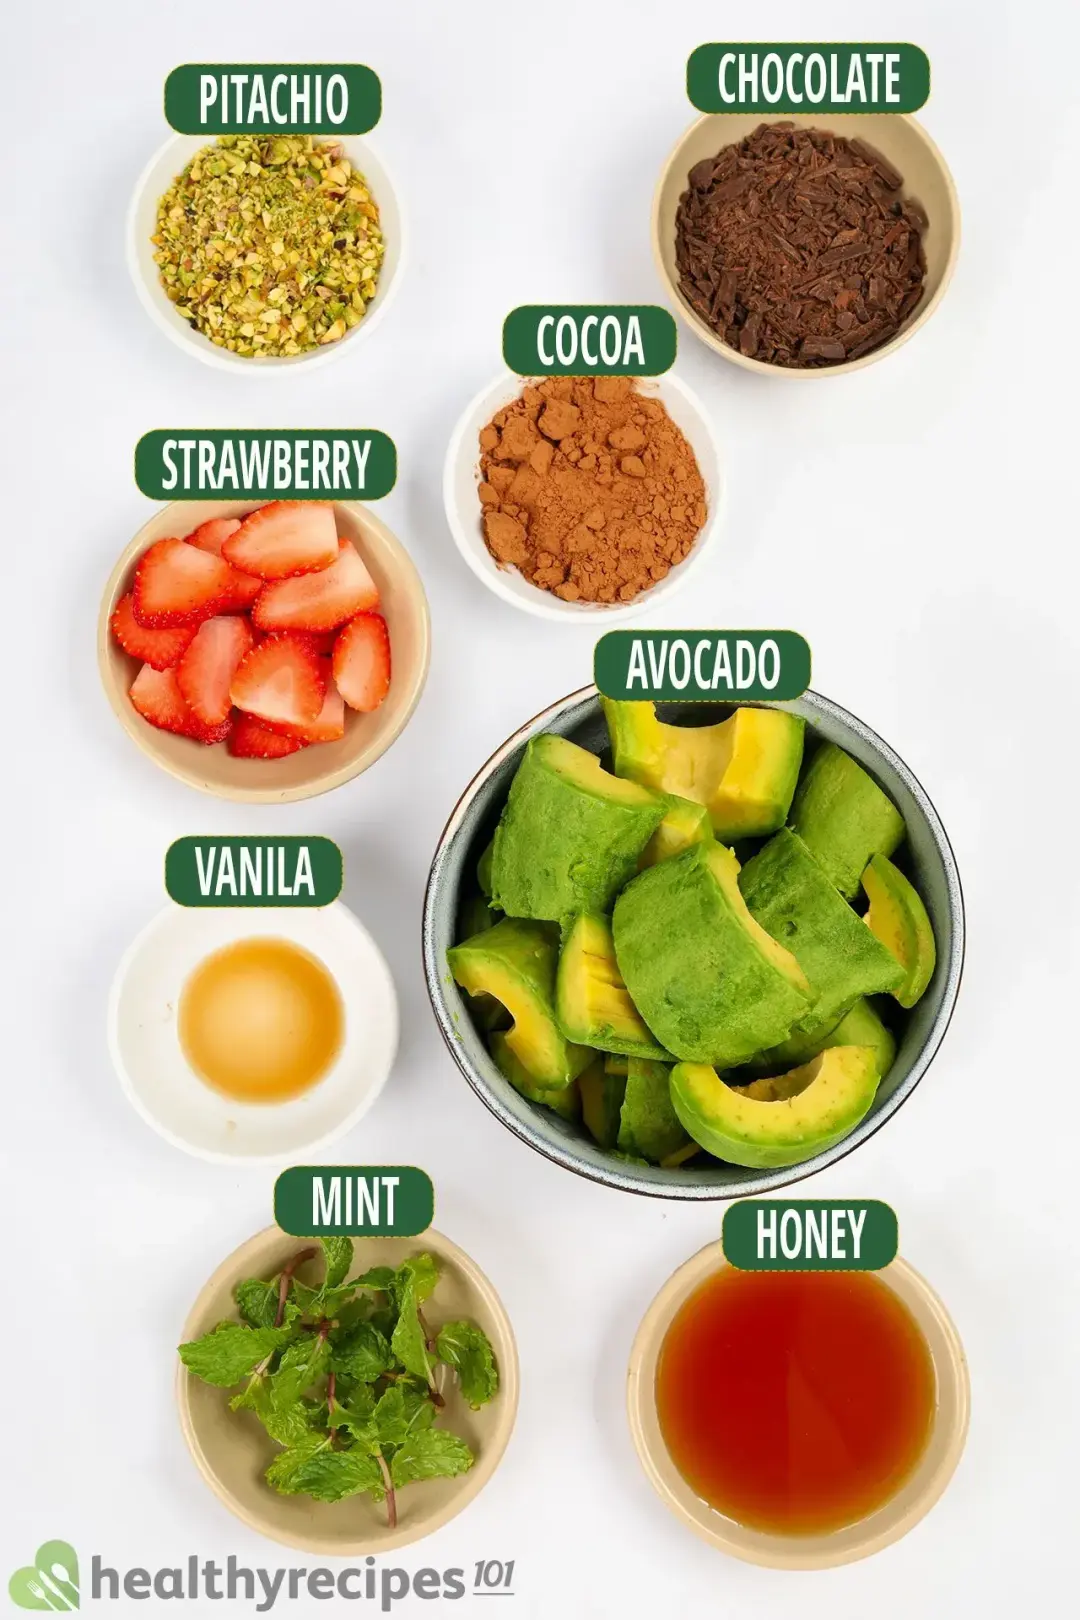 Ingredients for This Chocolate Avocado Pudding